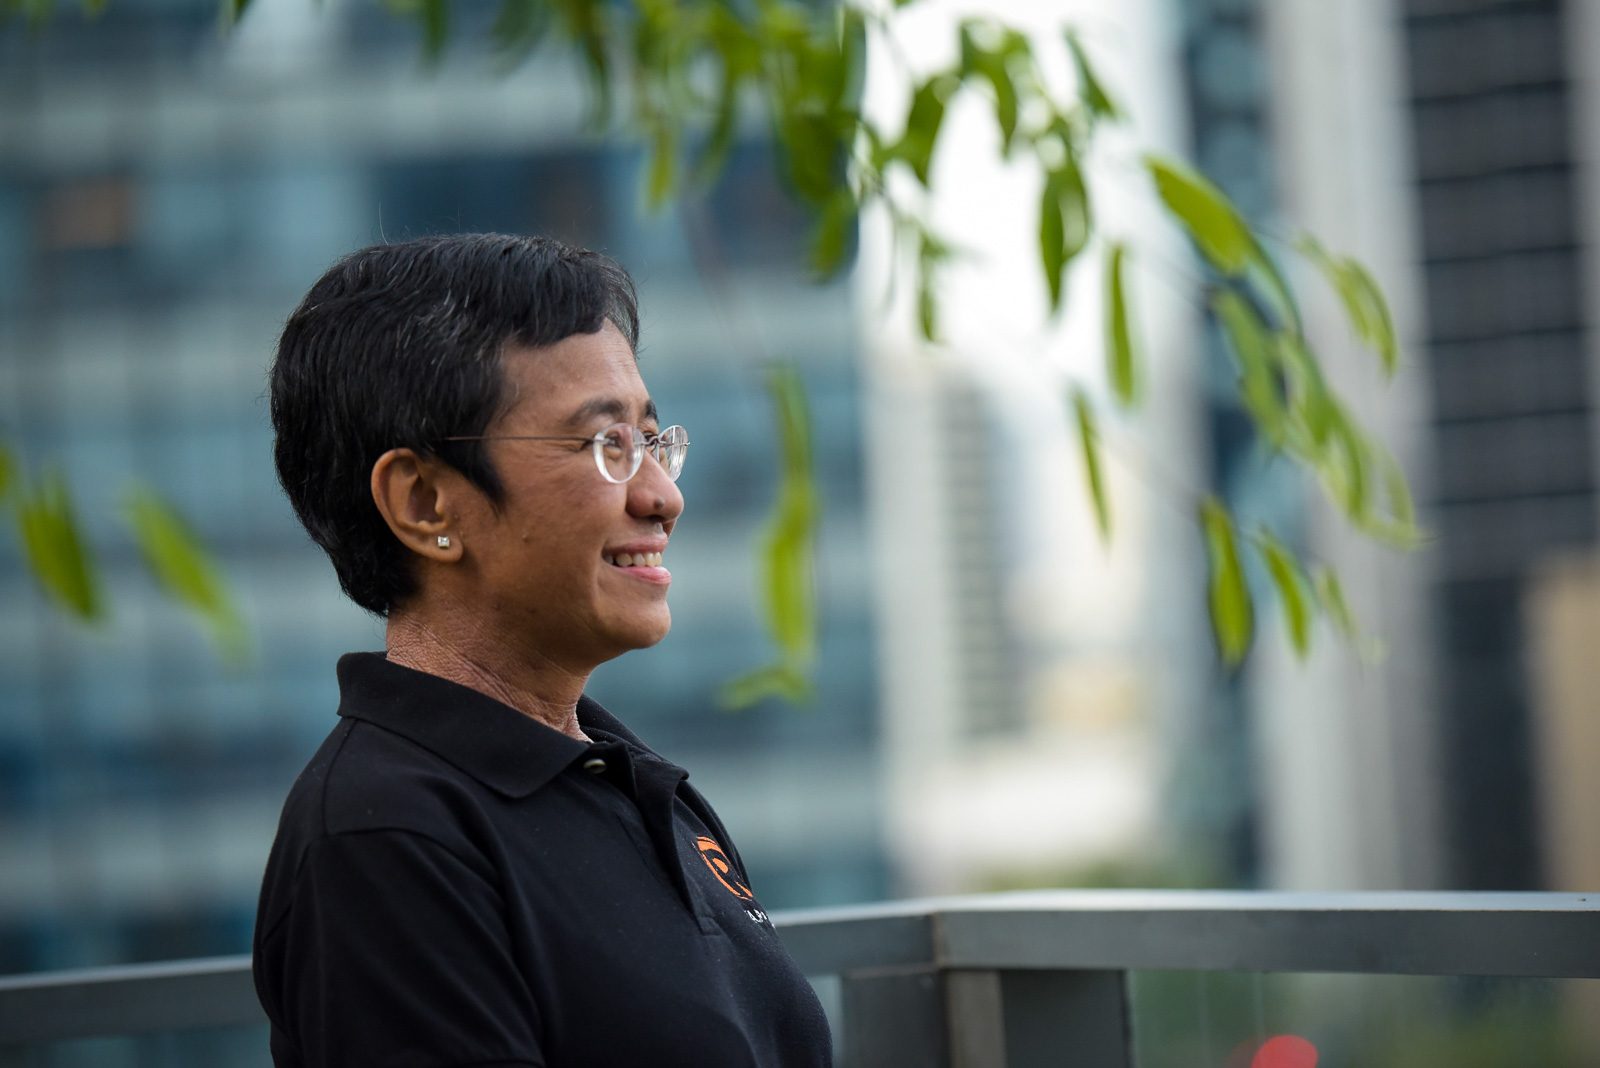 After winning Nobel, Maria Ressa allowed by CA to travel to US for Harvard lectures